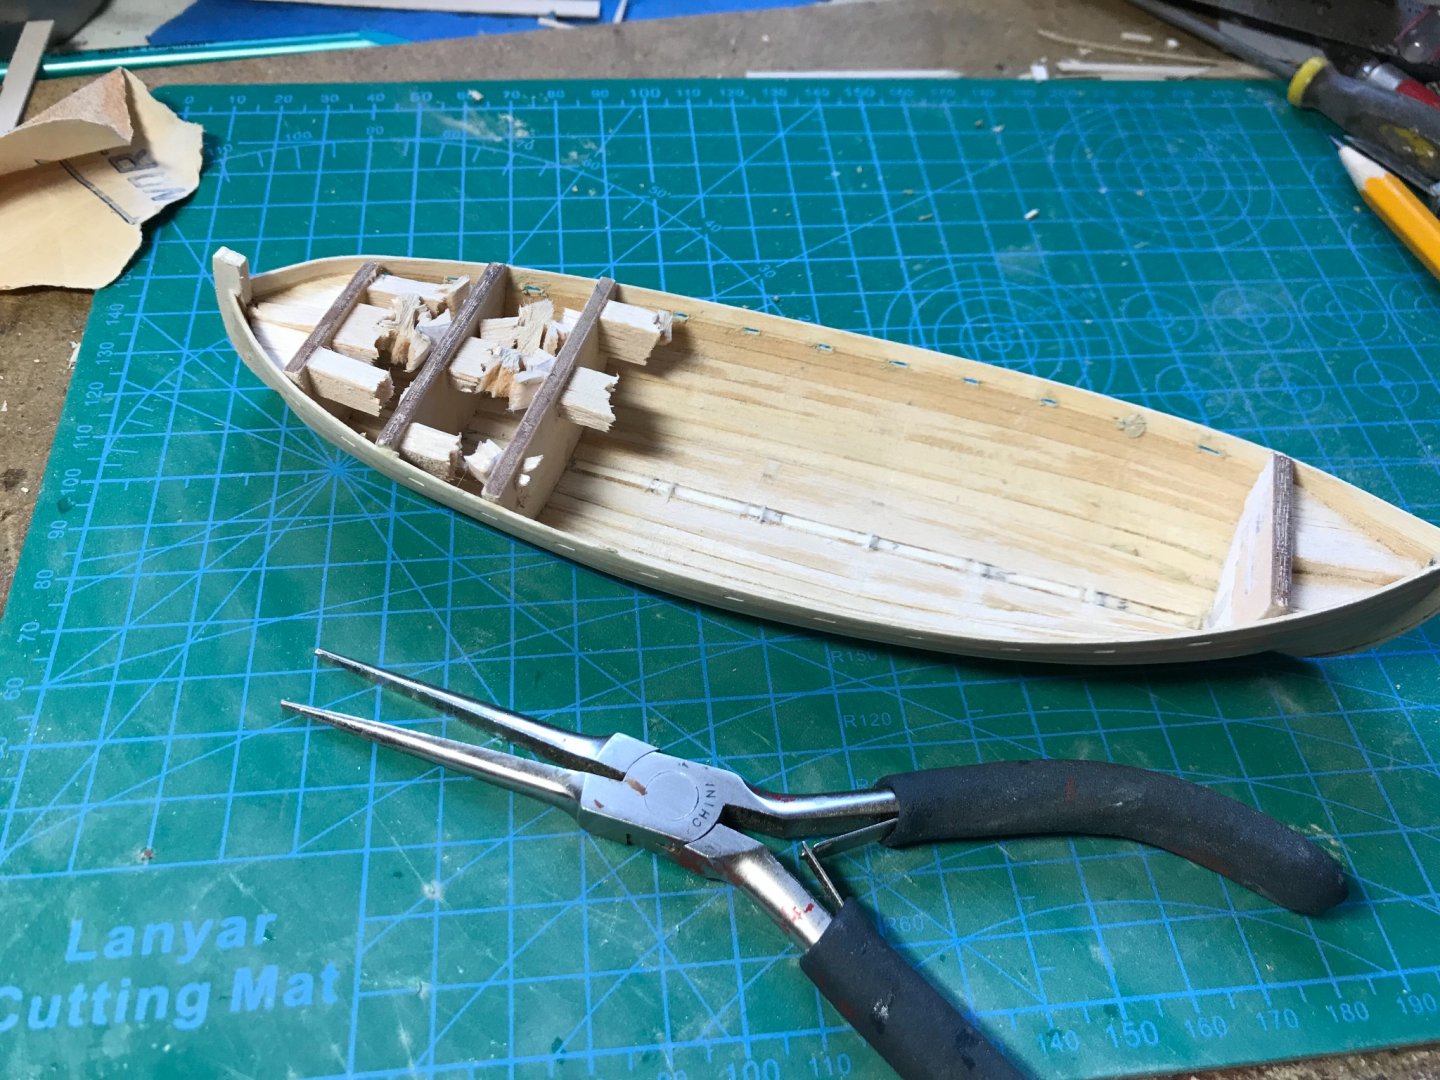 Barco Catalan by Gbmodeler - 1:48 Scale - Mediterranean Fishing Boat-  FINISHED - - Build logs for subjects built 1851 - 1900 - Model Ship World™